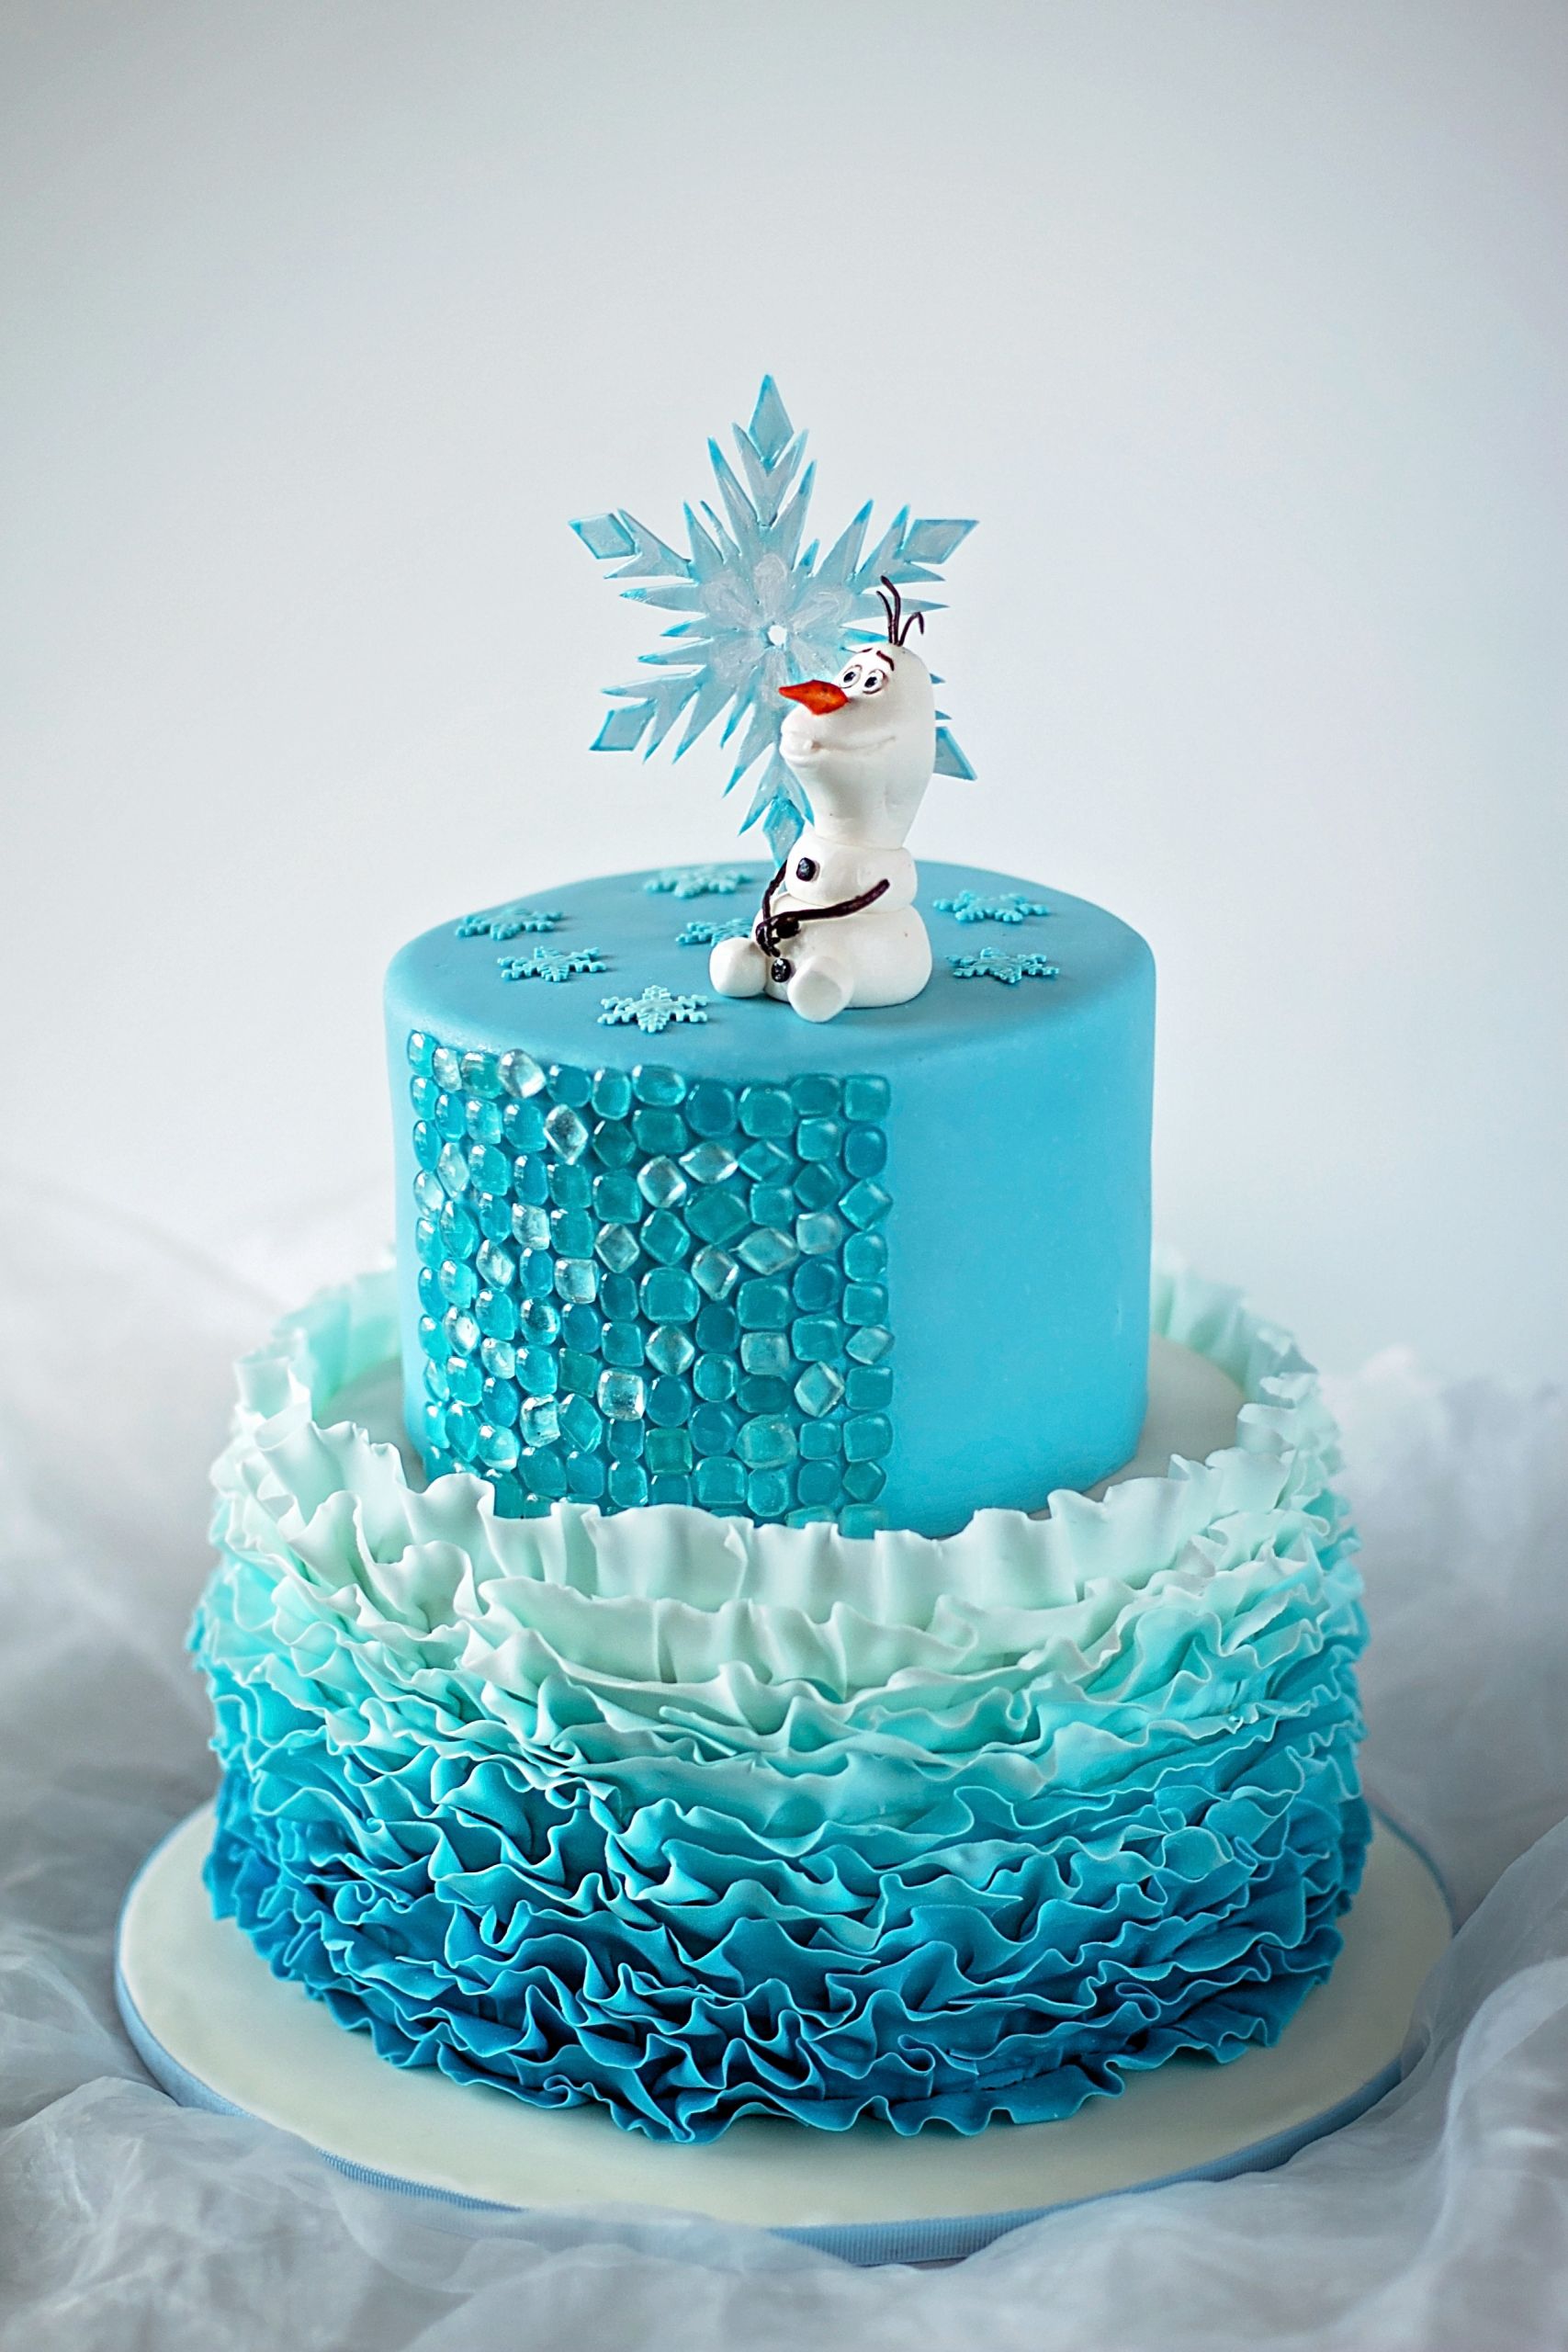 Frozen Birthday Cakes Images
 Mary Poppins Themed Cake 17 Cherry Tree Lane Whimsical